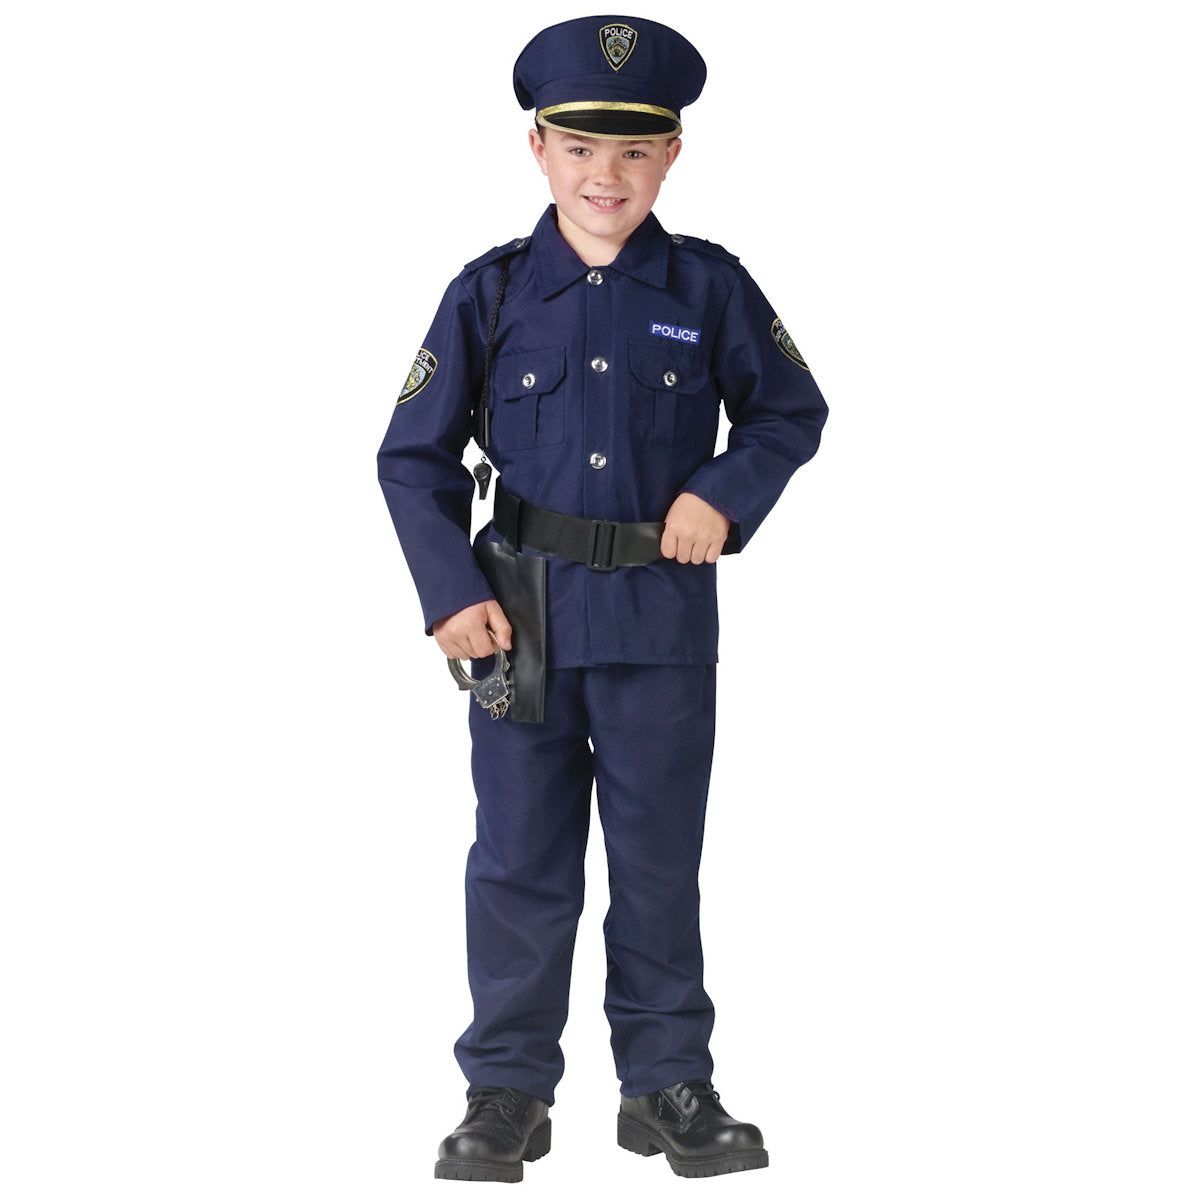 Policeman Deluxe Police Boy's fancy Dress Costume complete with hat